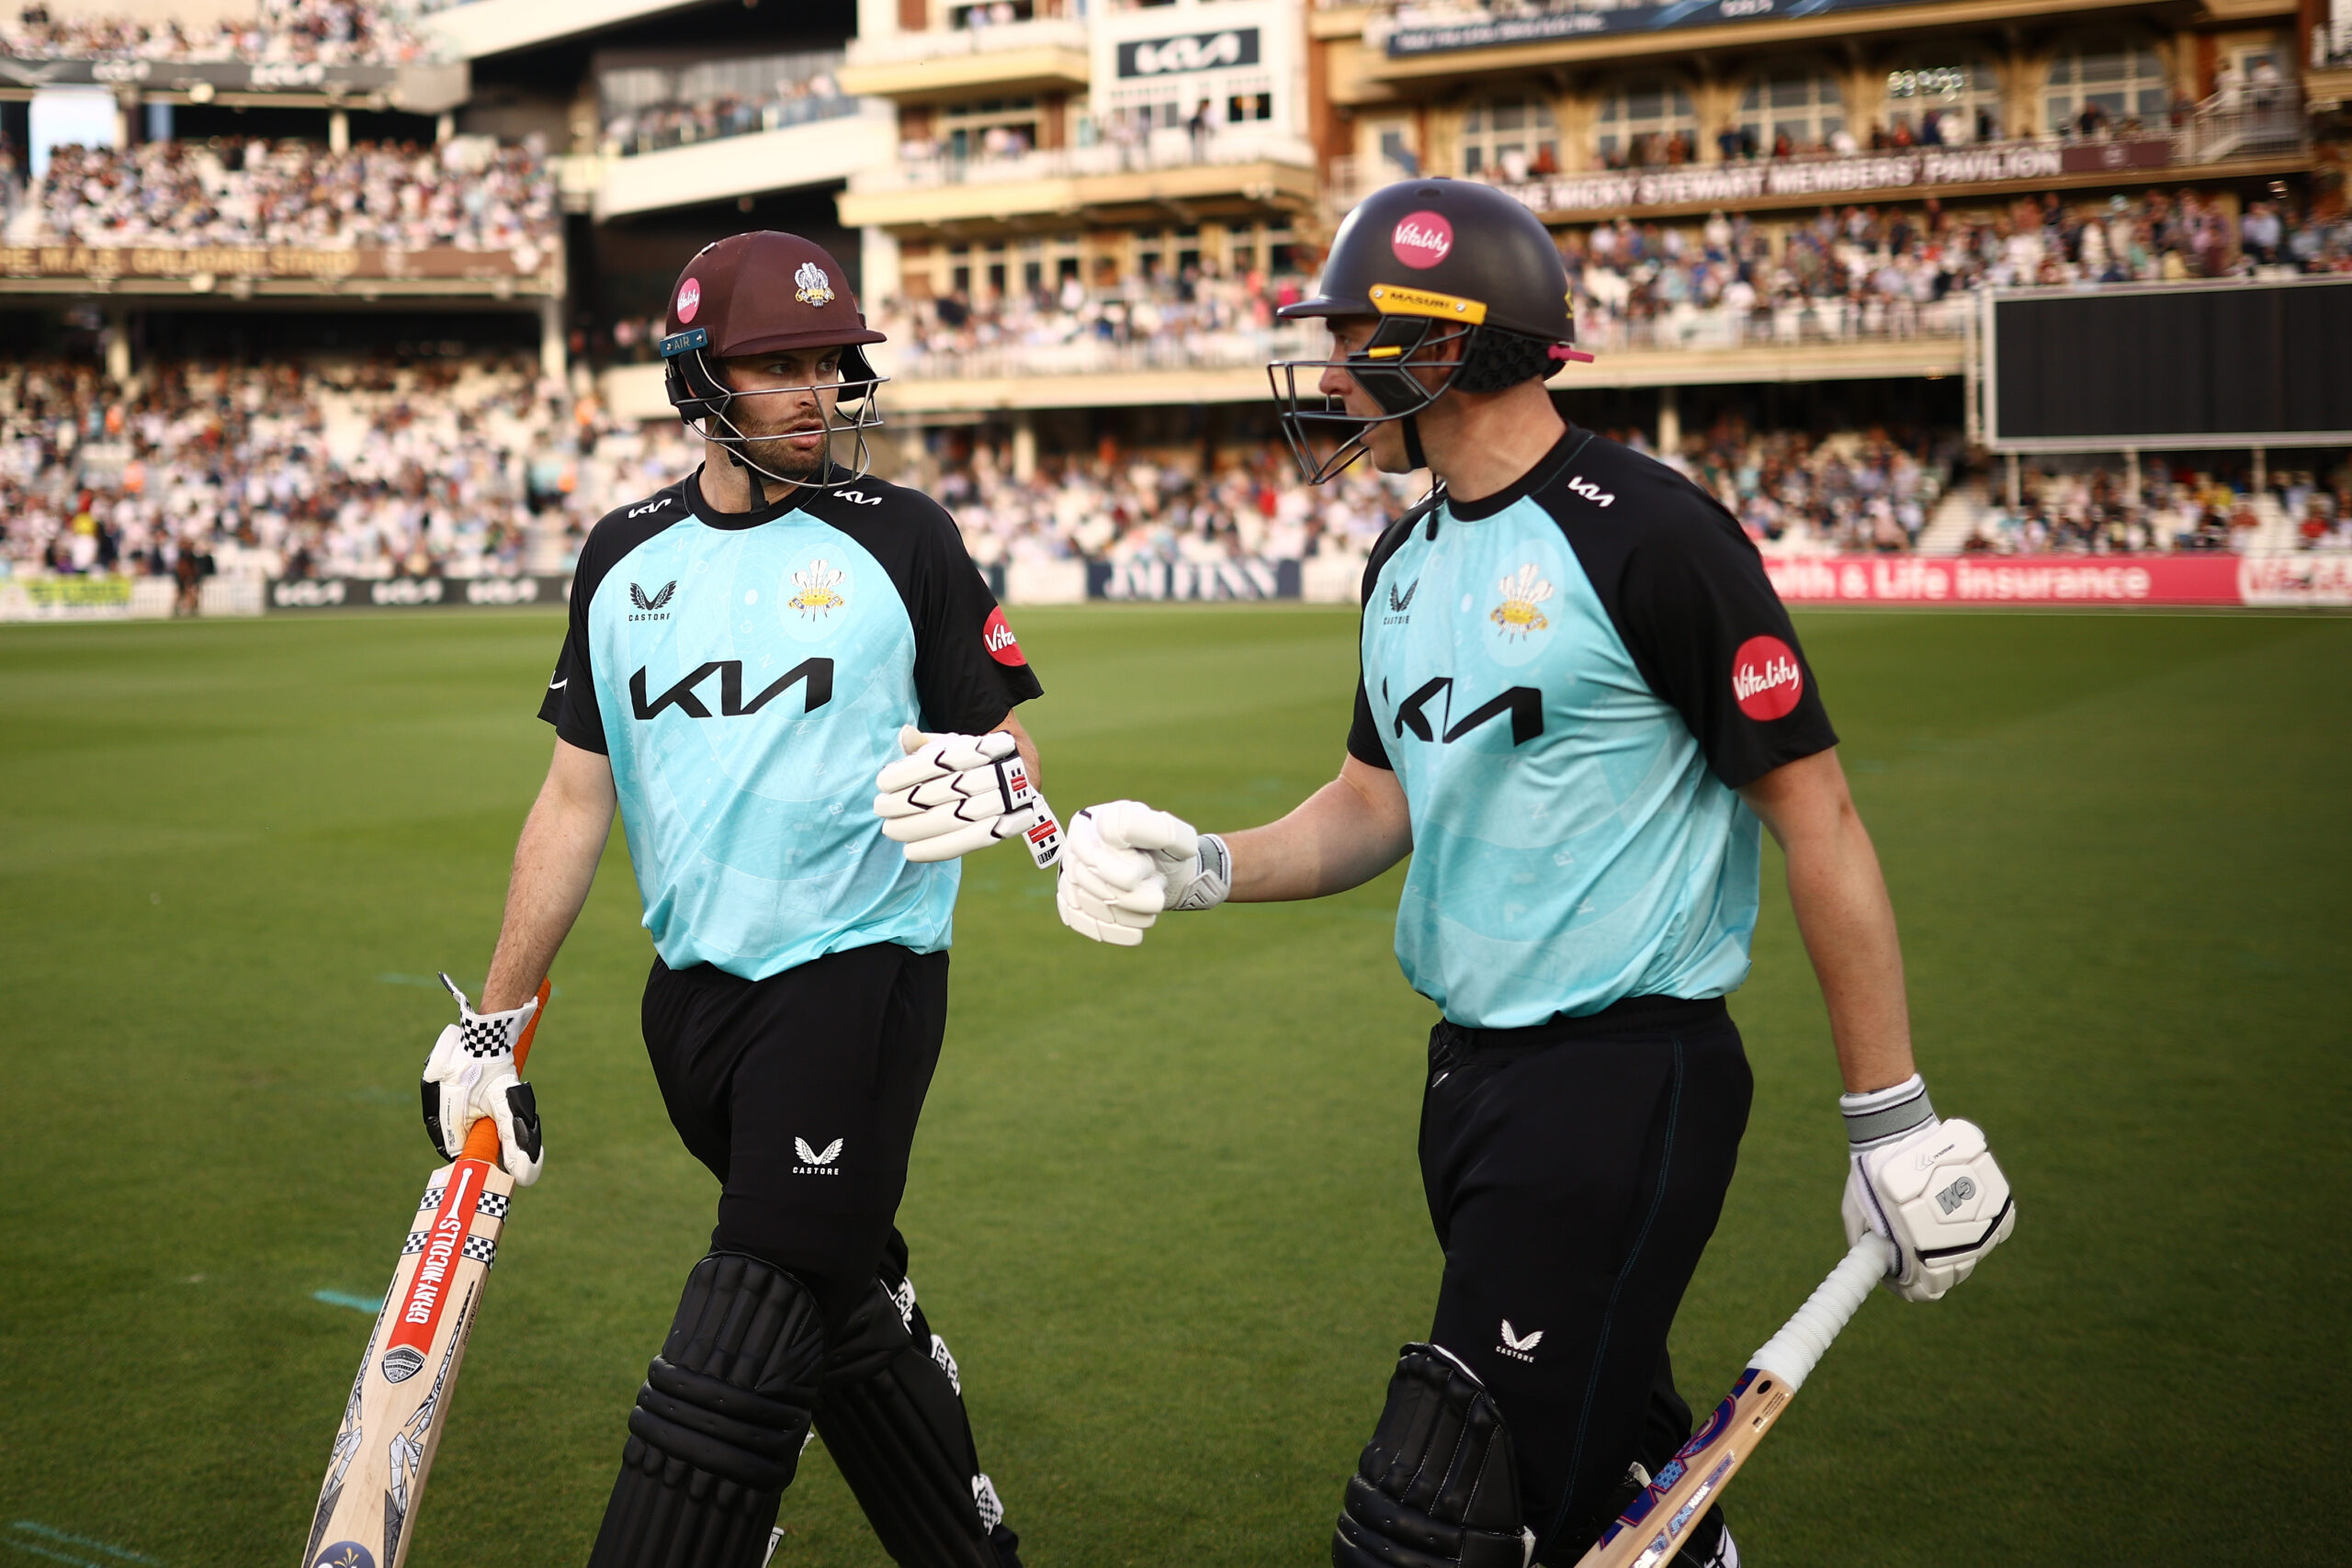 Surrey v Middlesex – Proud Surrey T20: Full Preview